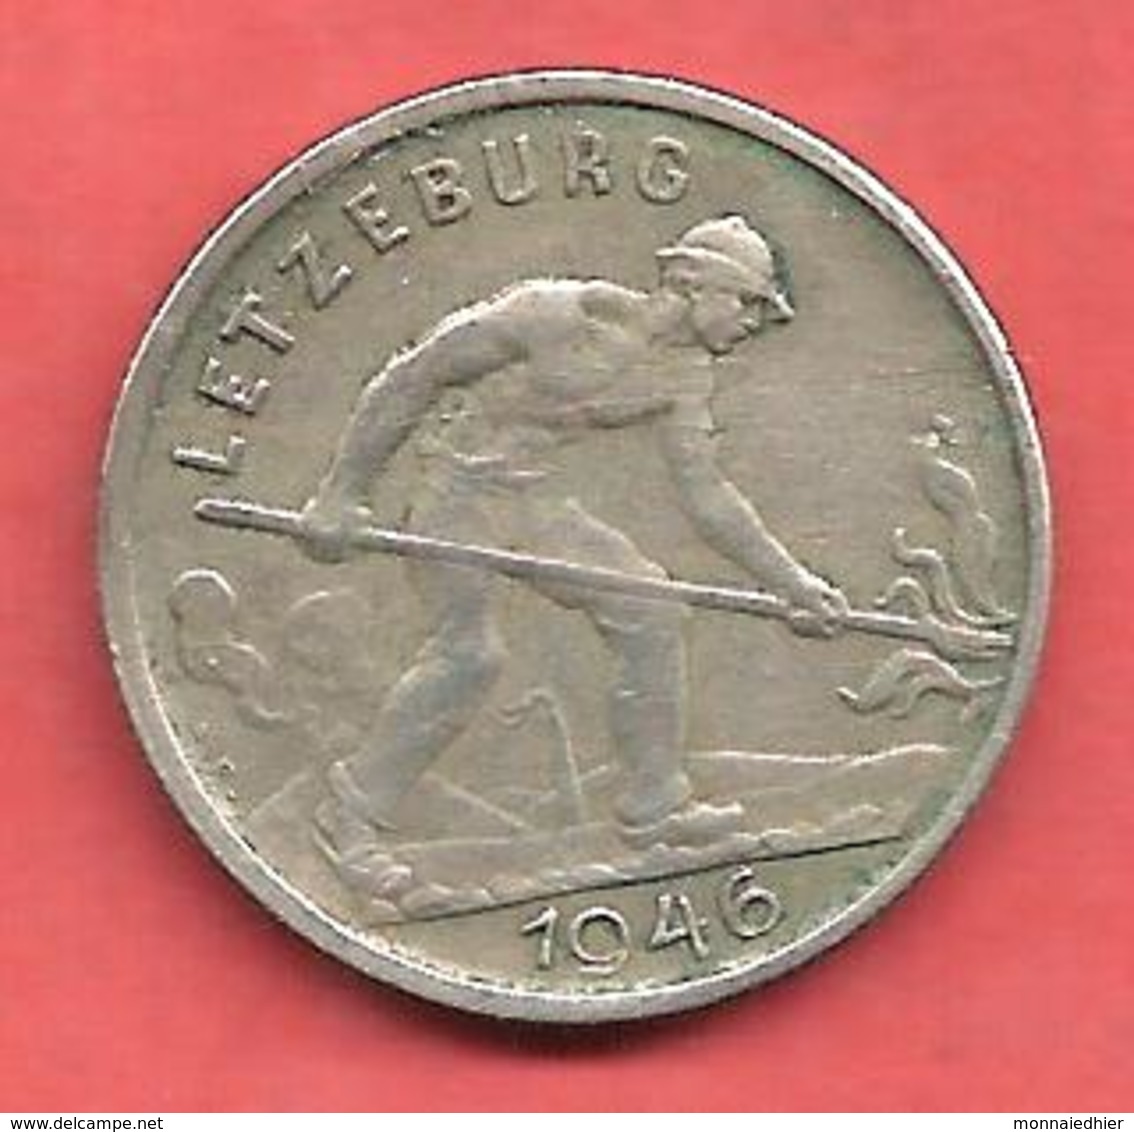 1 Franc , LUXEMBOURG , Cupro-Nickel , 1946 , N° KM # 46.1 - Luxembourg